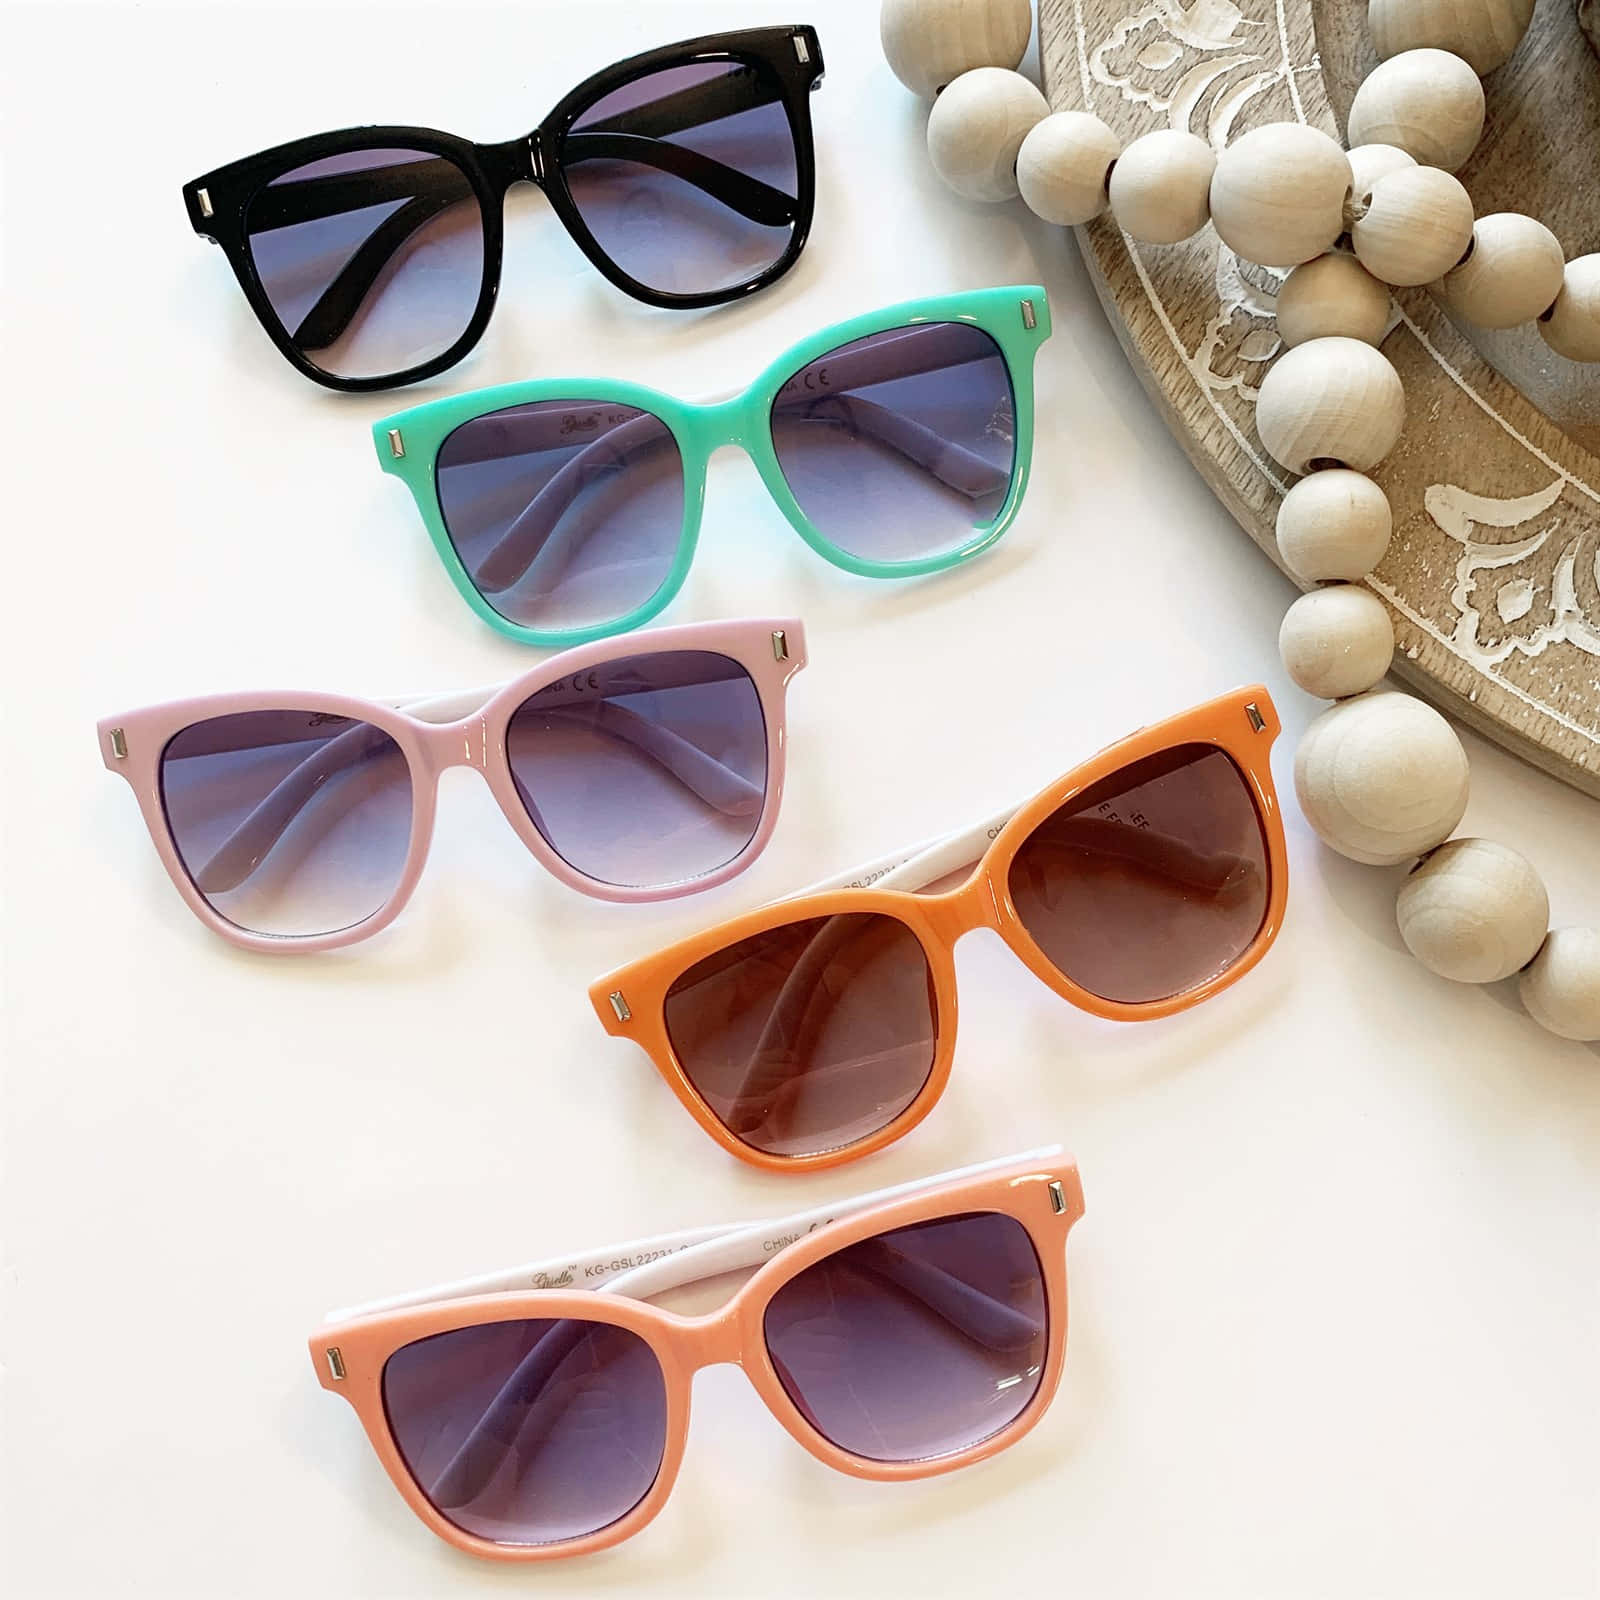 A Group Of Sunglasses With Different Colors And Beads